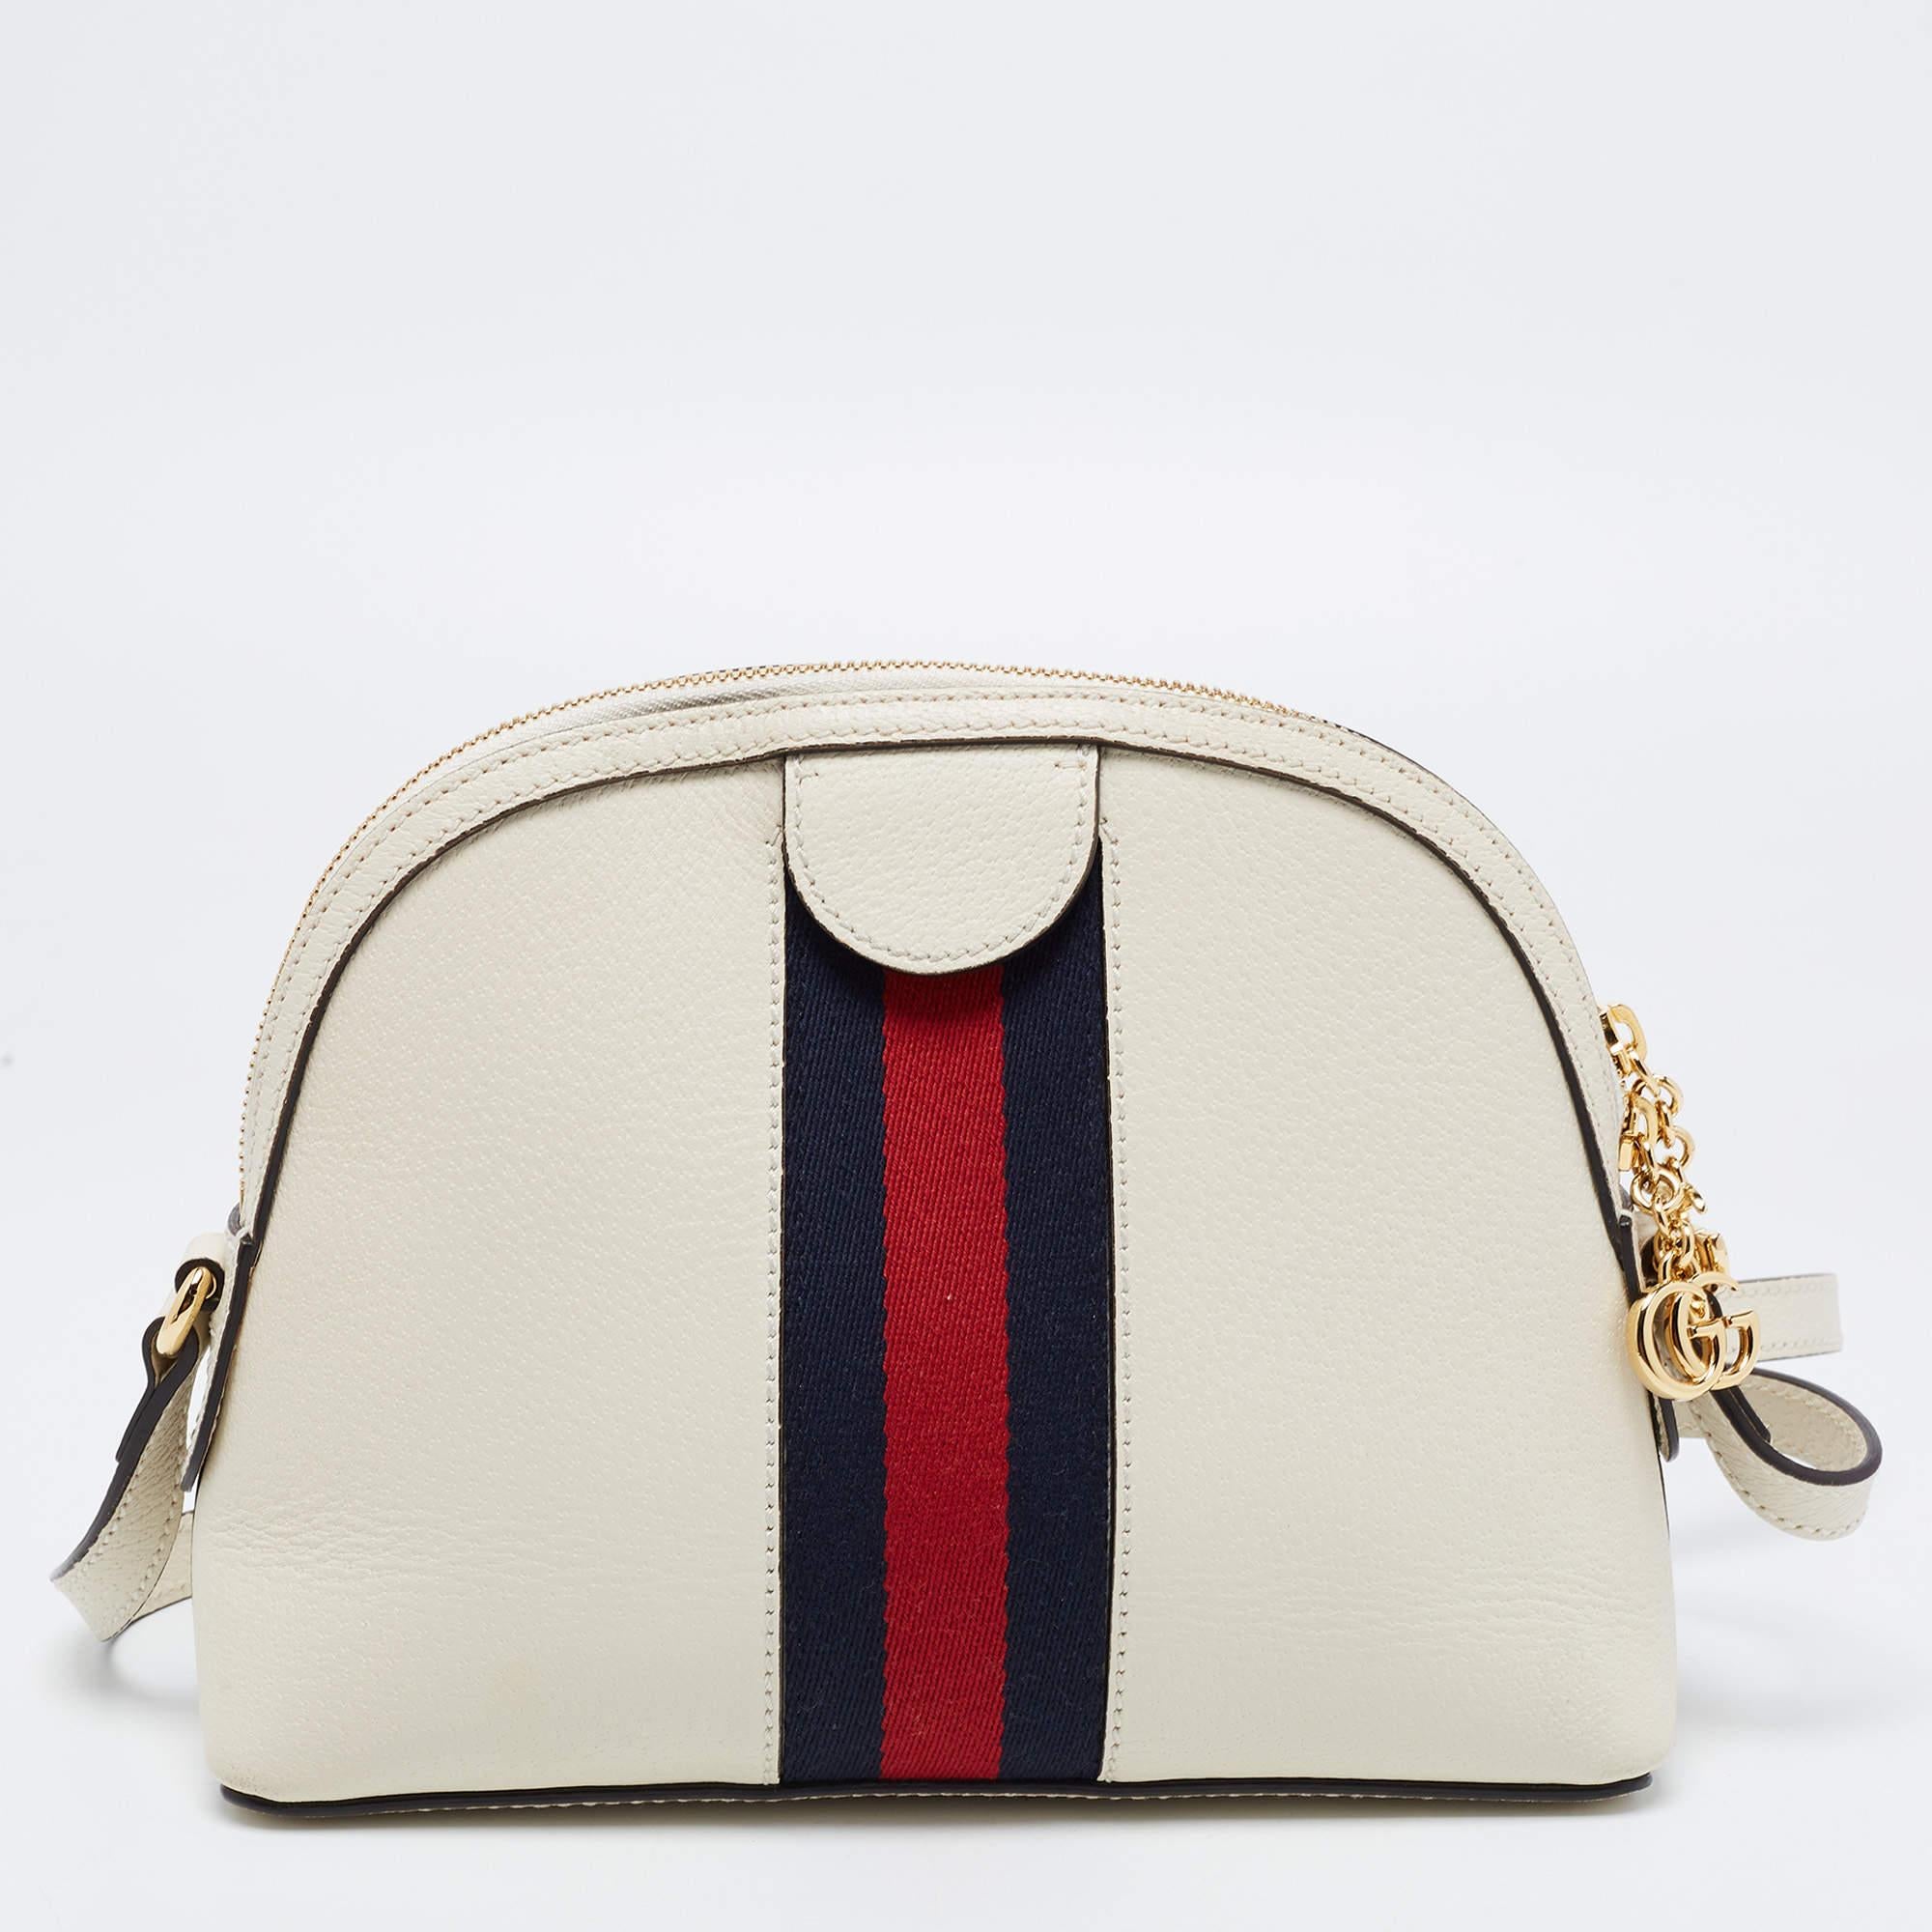 Every creation from Gucci is noteworthy for its timeless charm and versatile design. Created from leather, this Gucci Ophidia bag is imbued with heritage details. The Web stripe detailing and the interlocked 'GG' motif on the front give it a luxe